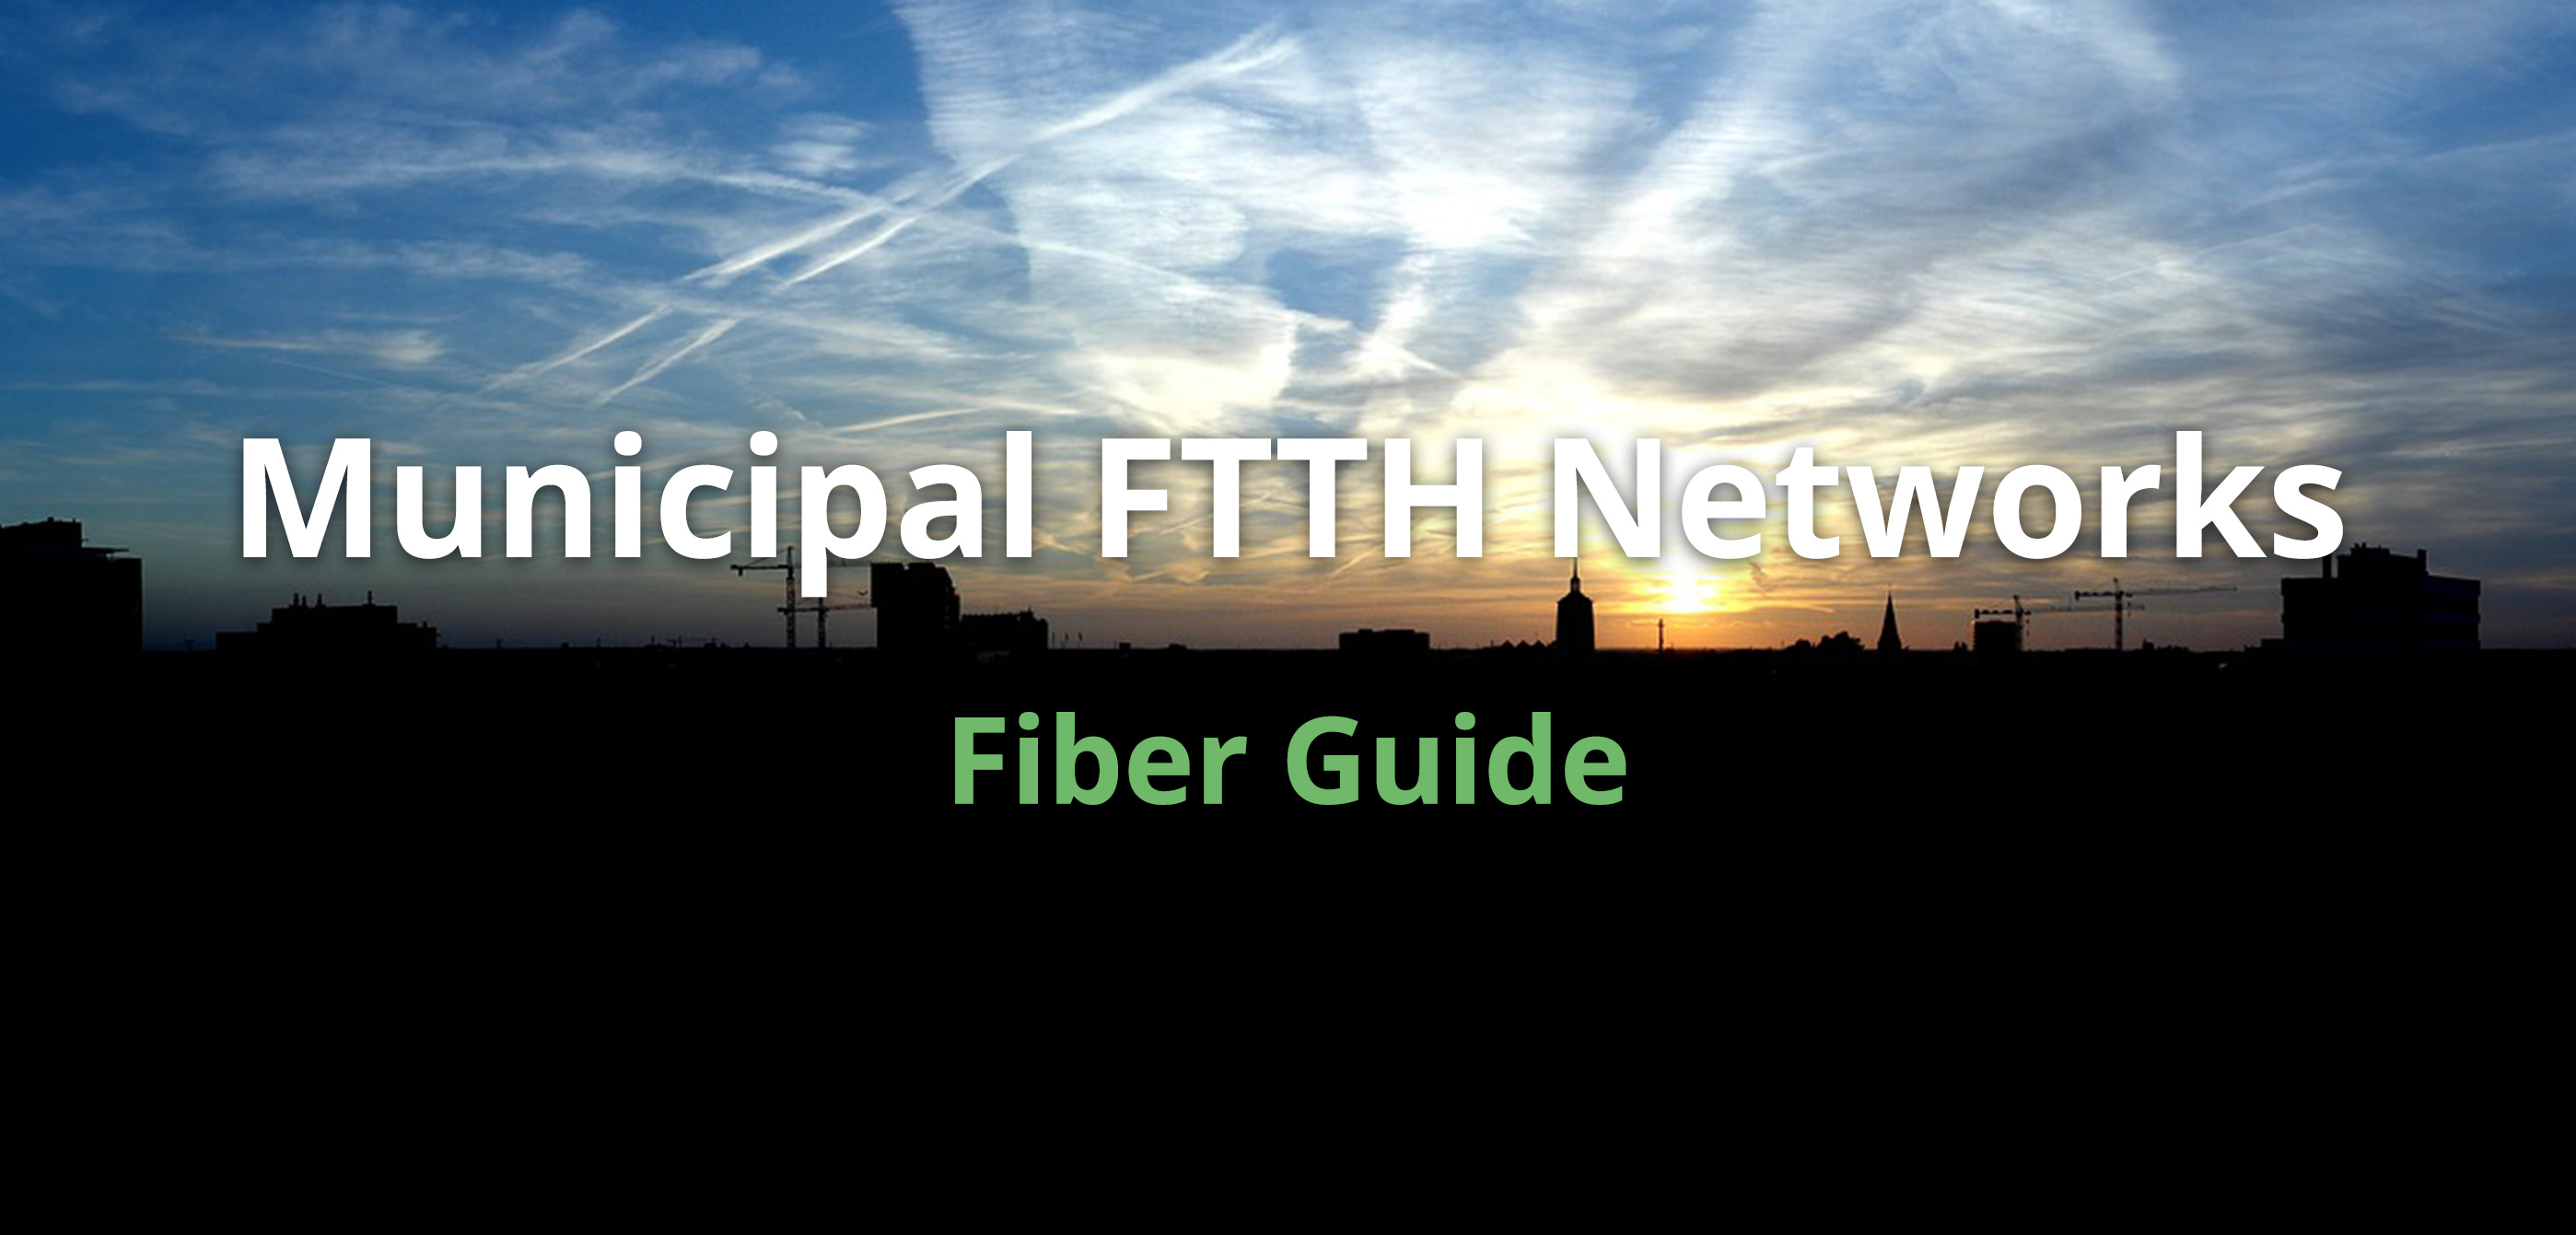 Fiber Guide_Municipal FTTH Networks_Landing page_Featured image